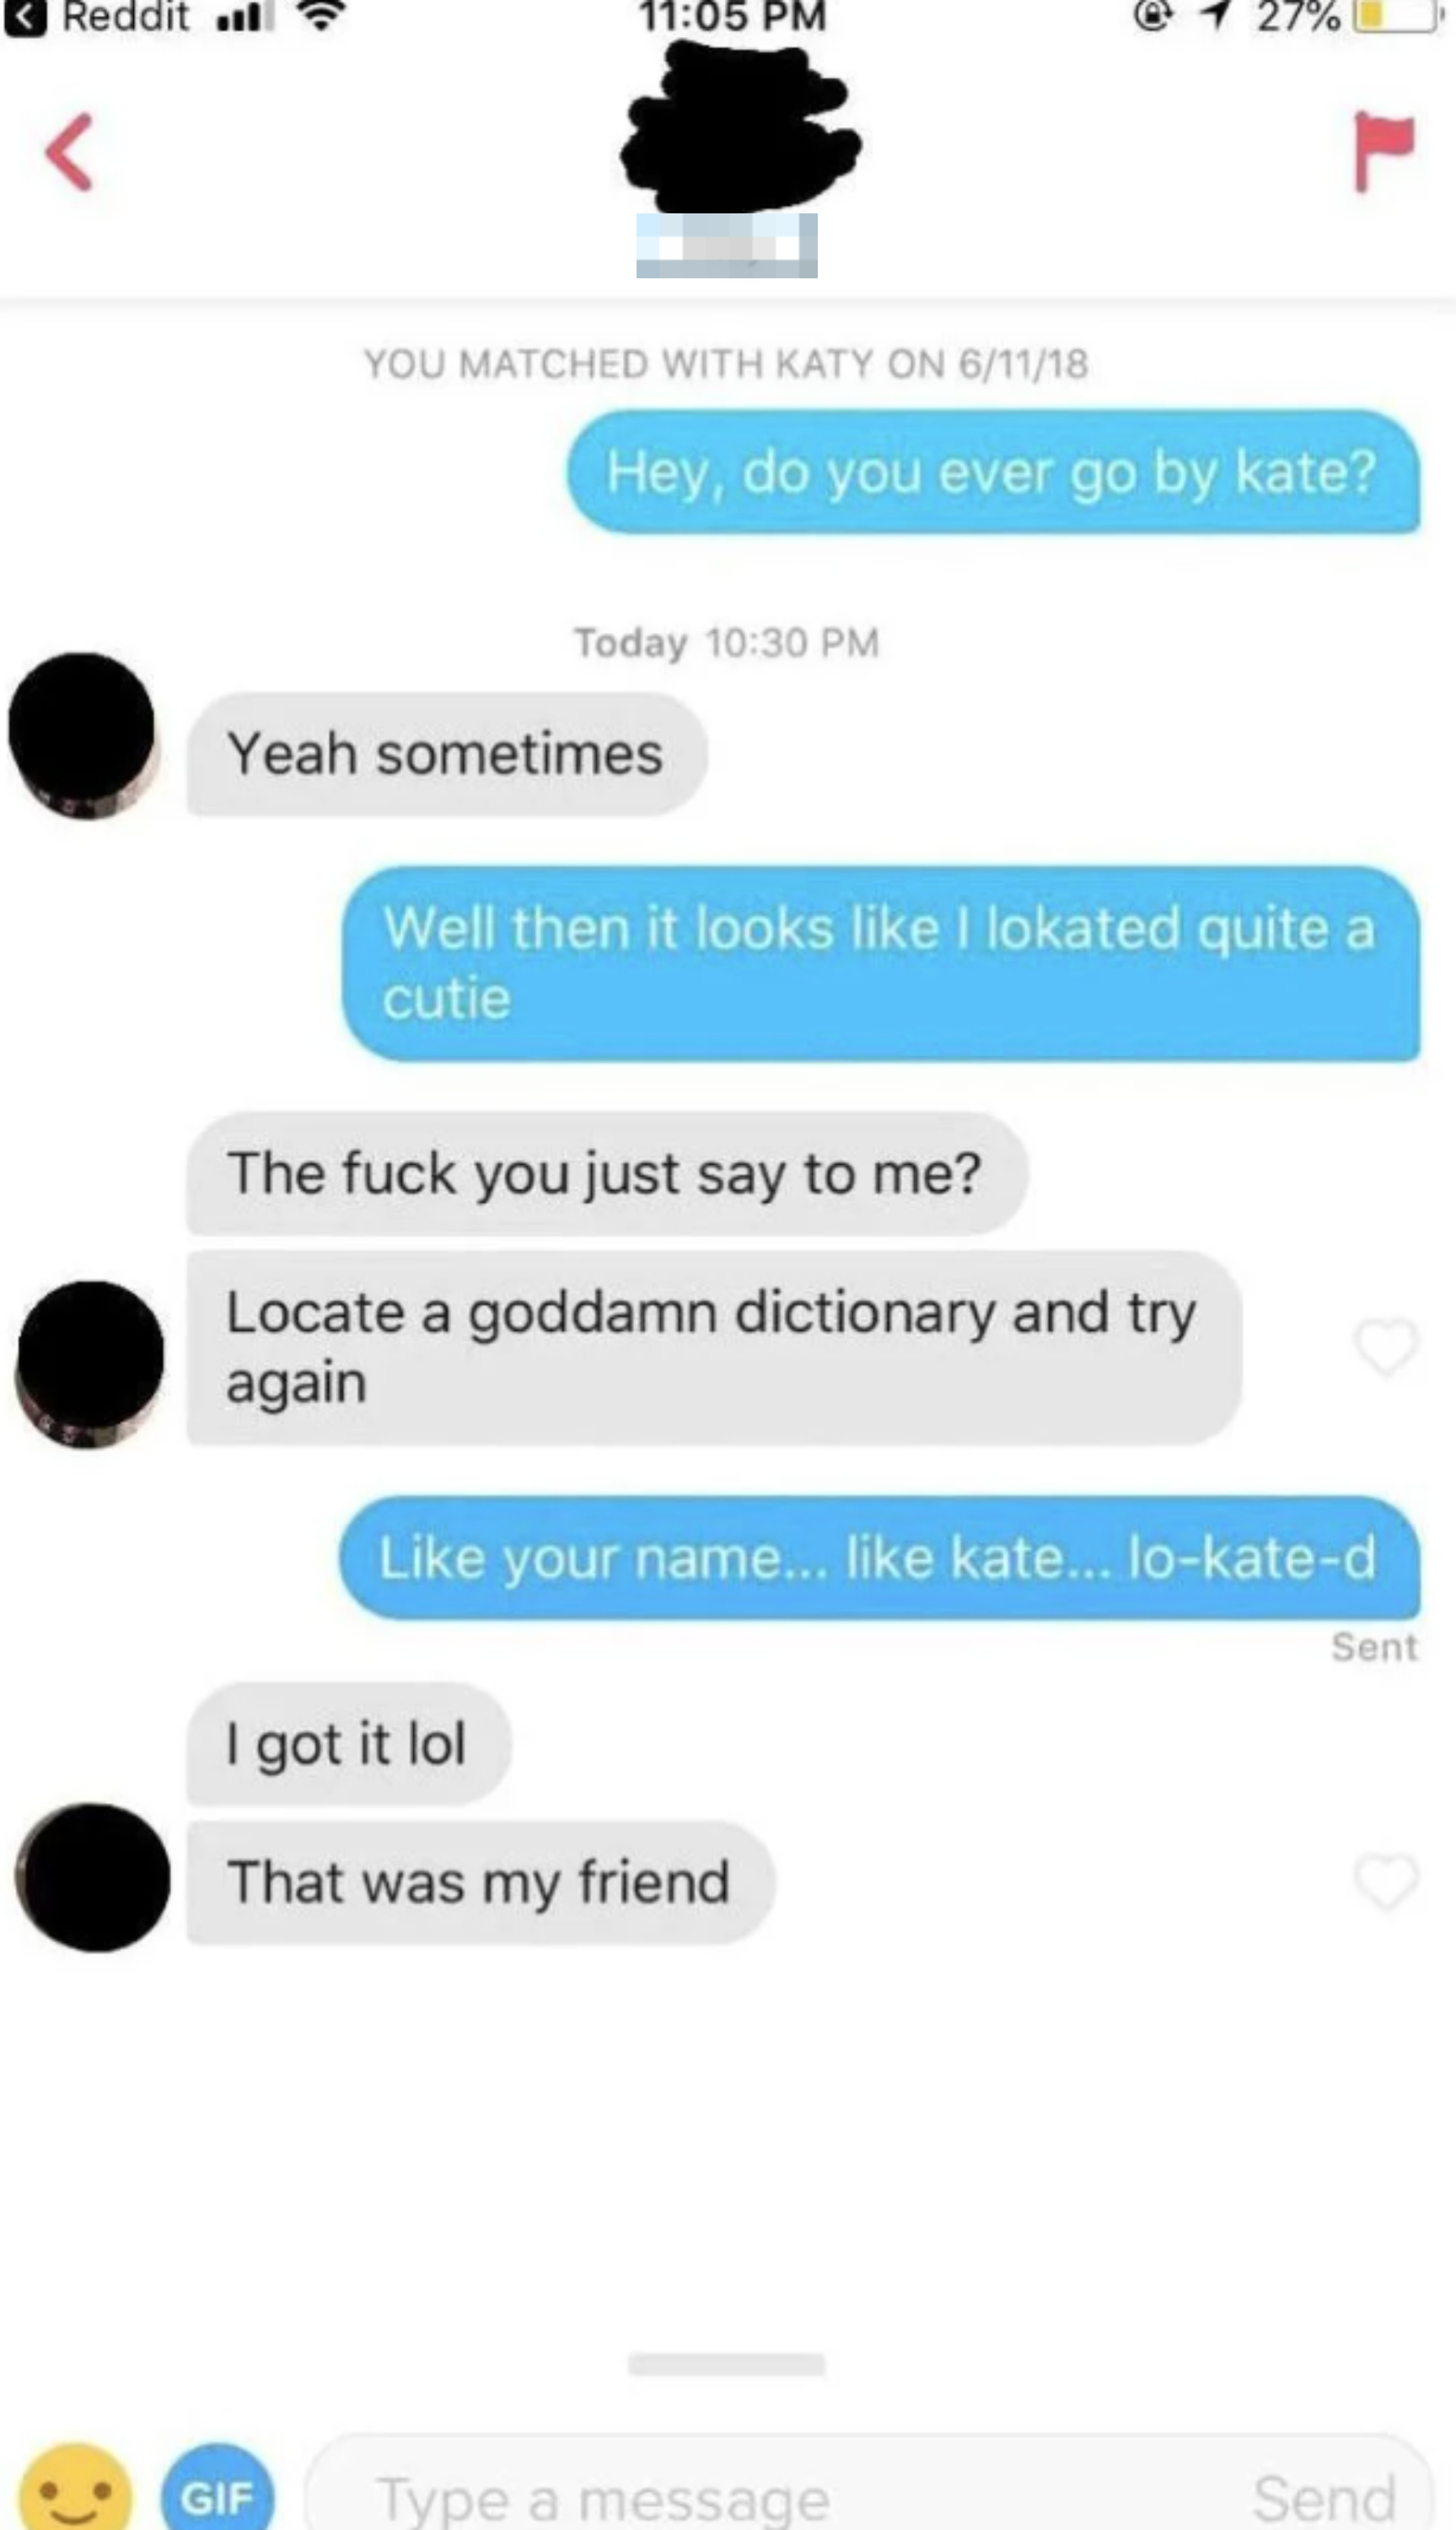 A text conversation on a dating app where one person jokes about the other&#x27;s grammatical error, saying &quot;Locate a goddamn dictionary and try again,&quot; and the other replies, &quot;Like your name... like Kate... lo-kate-d.&quot;